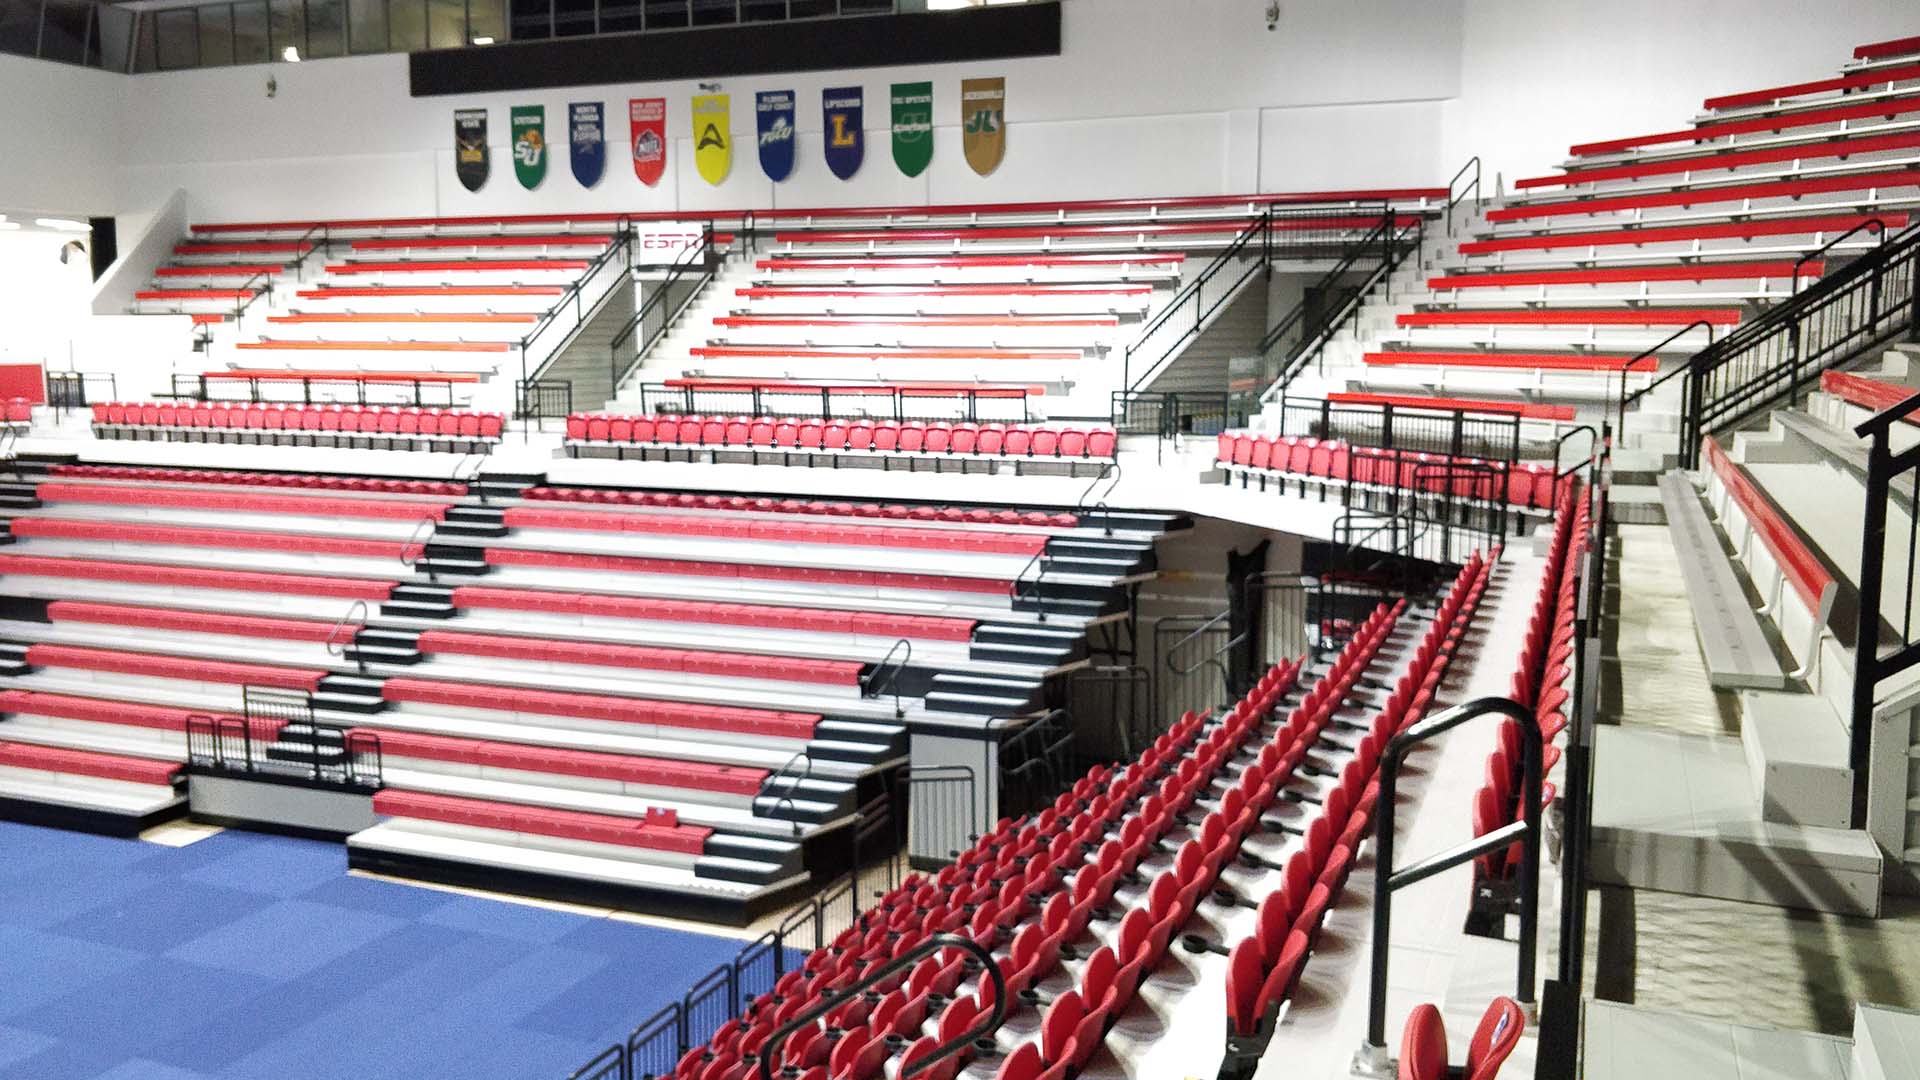 A closer view of the arena seating and aluminum rail system at NJIT Wellness and Events Center.